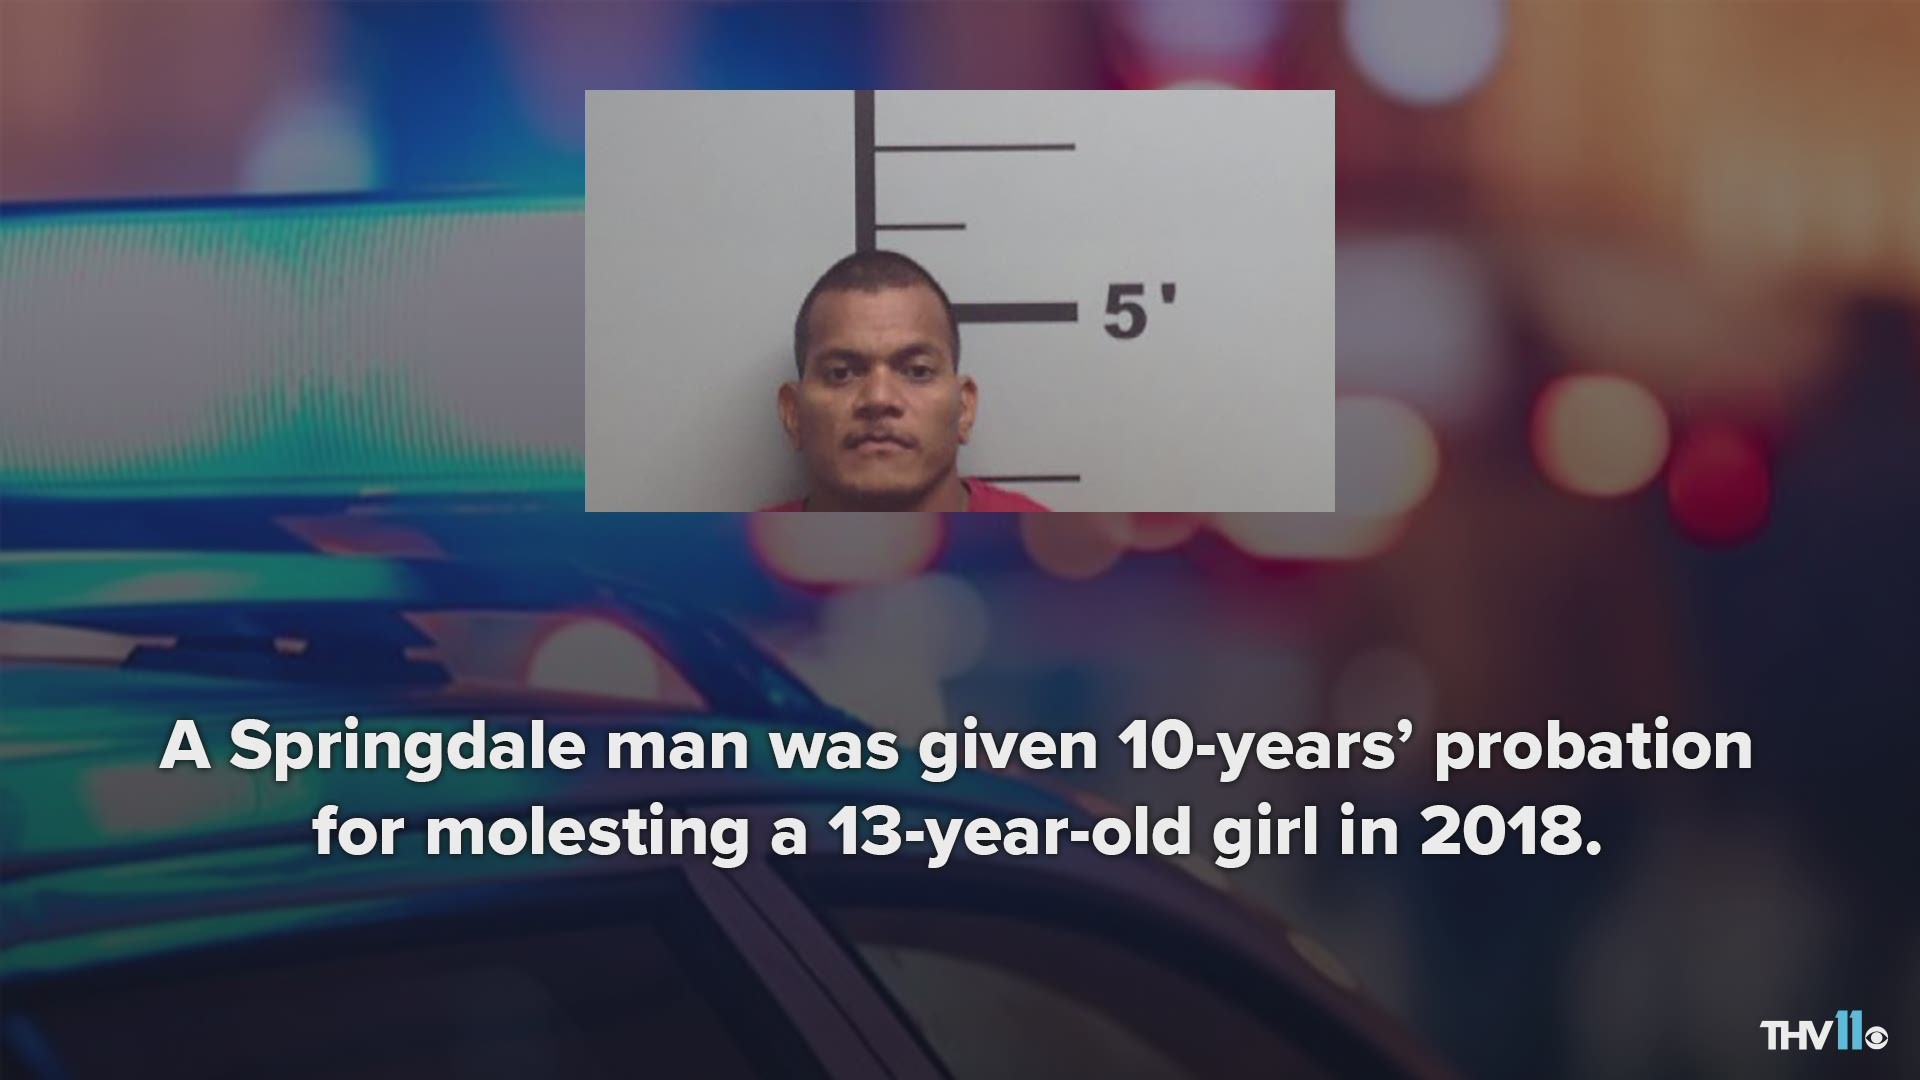 A Springdale man was given 10-years’ probation for molesting a 13-year-old girl.